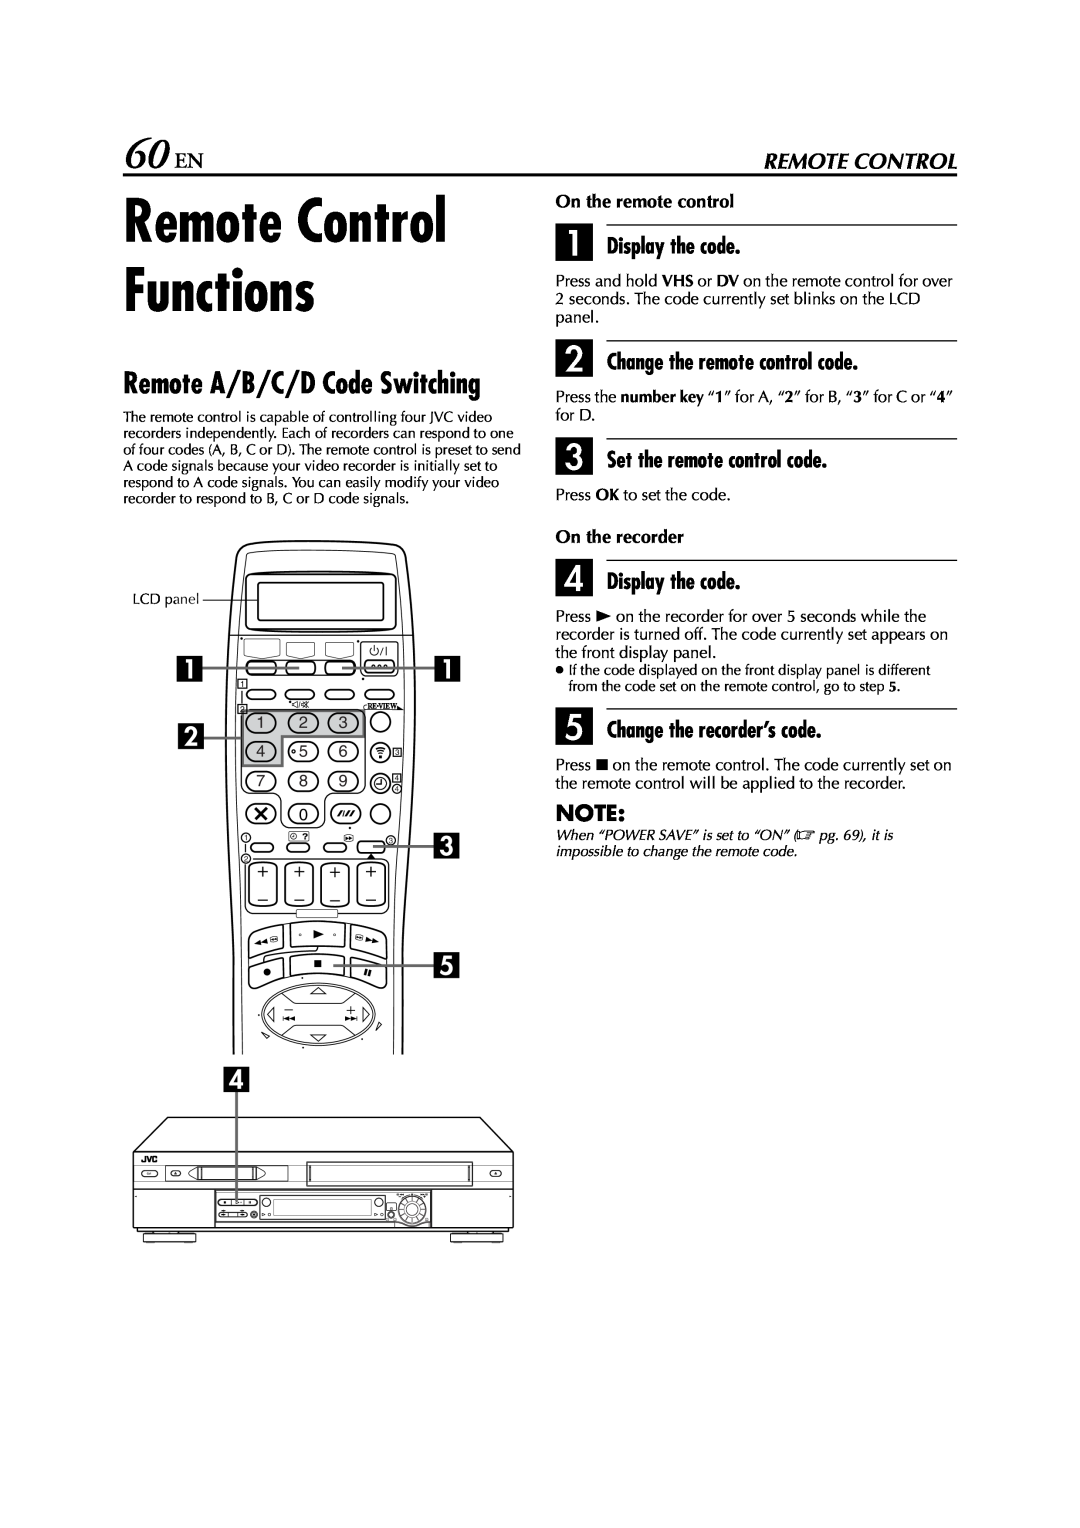 JVC LPT0616-001A 60 EN, Remote Control Functions, Remote A/B/C/D Code Switching, A Display the code, D Display the code 